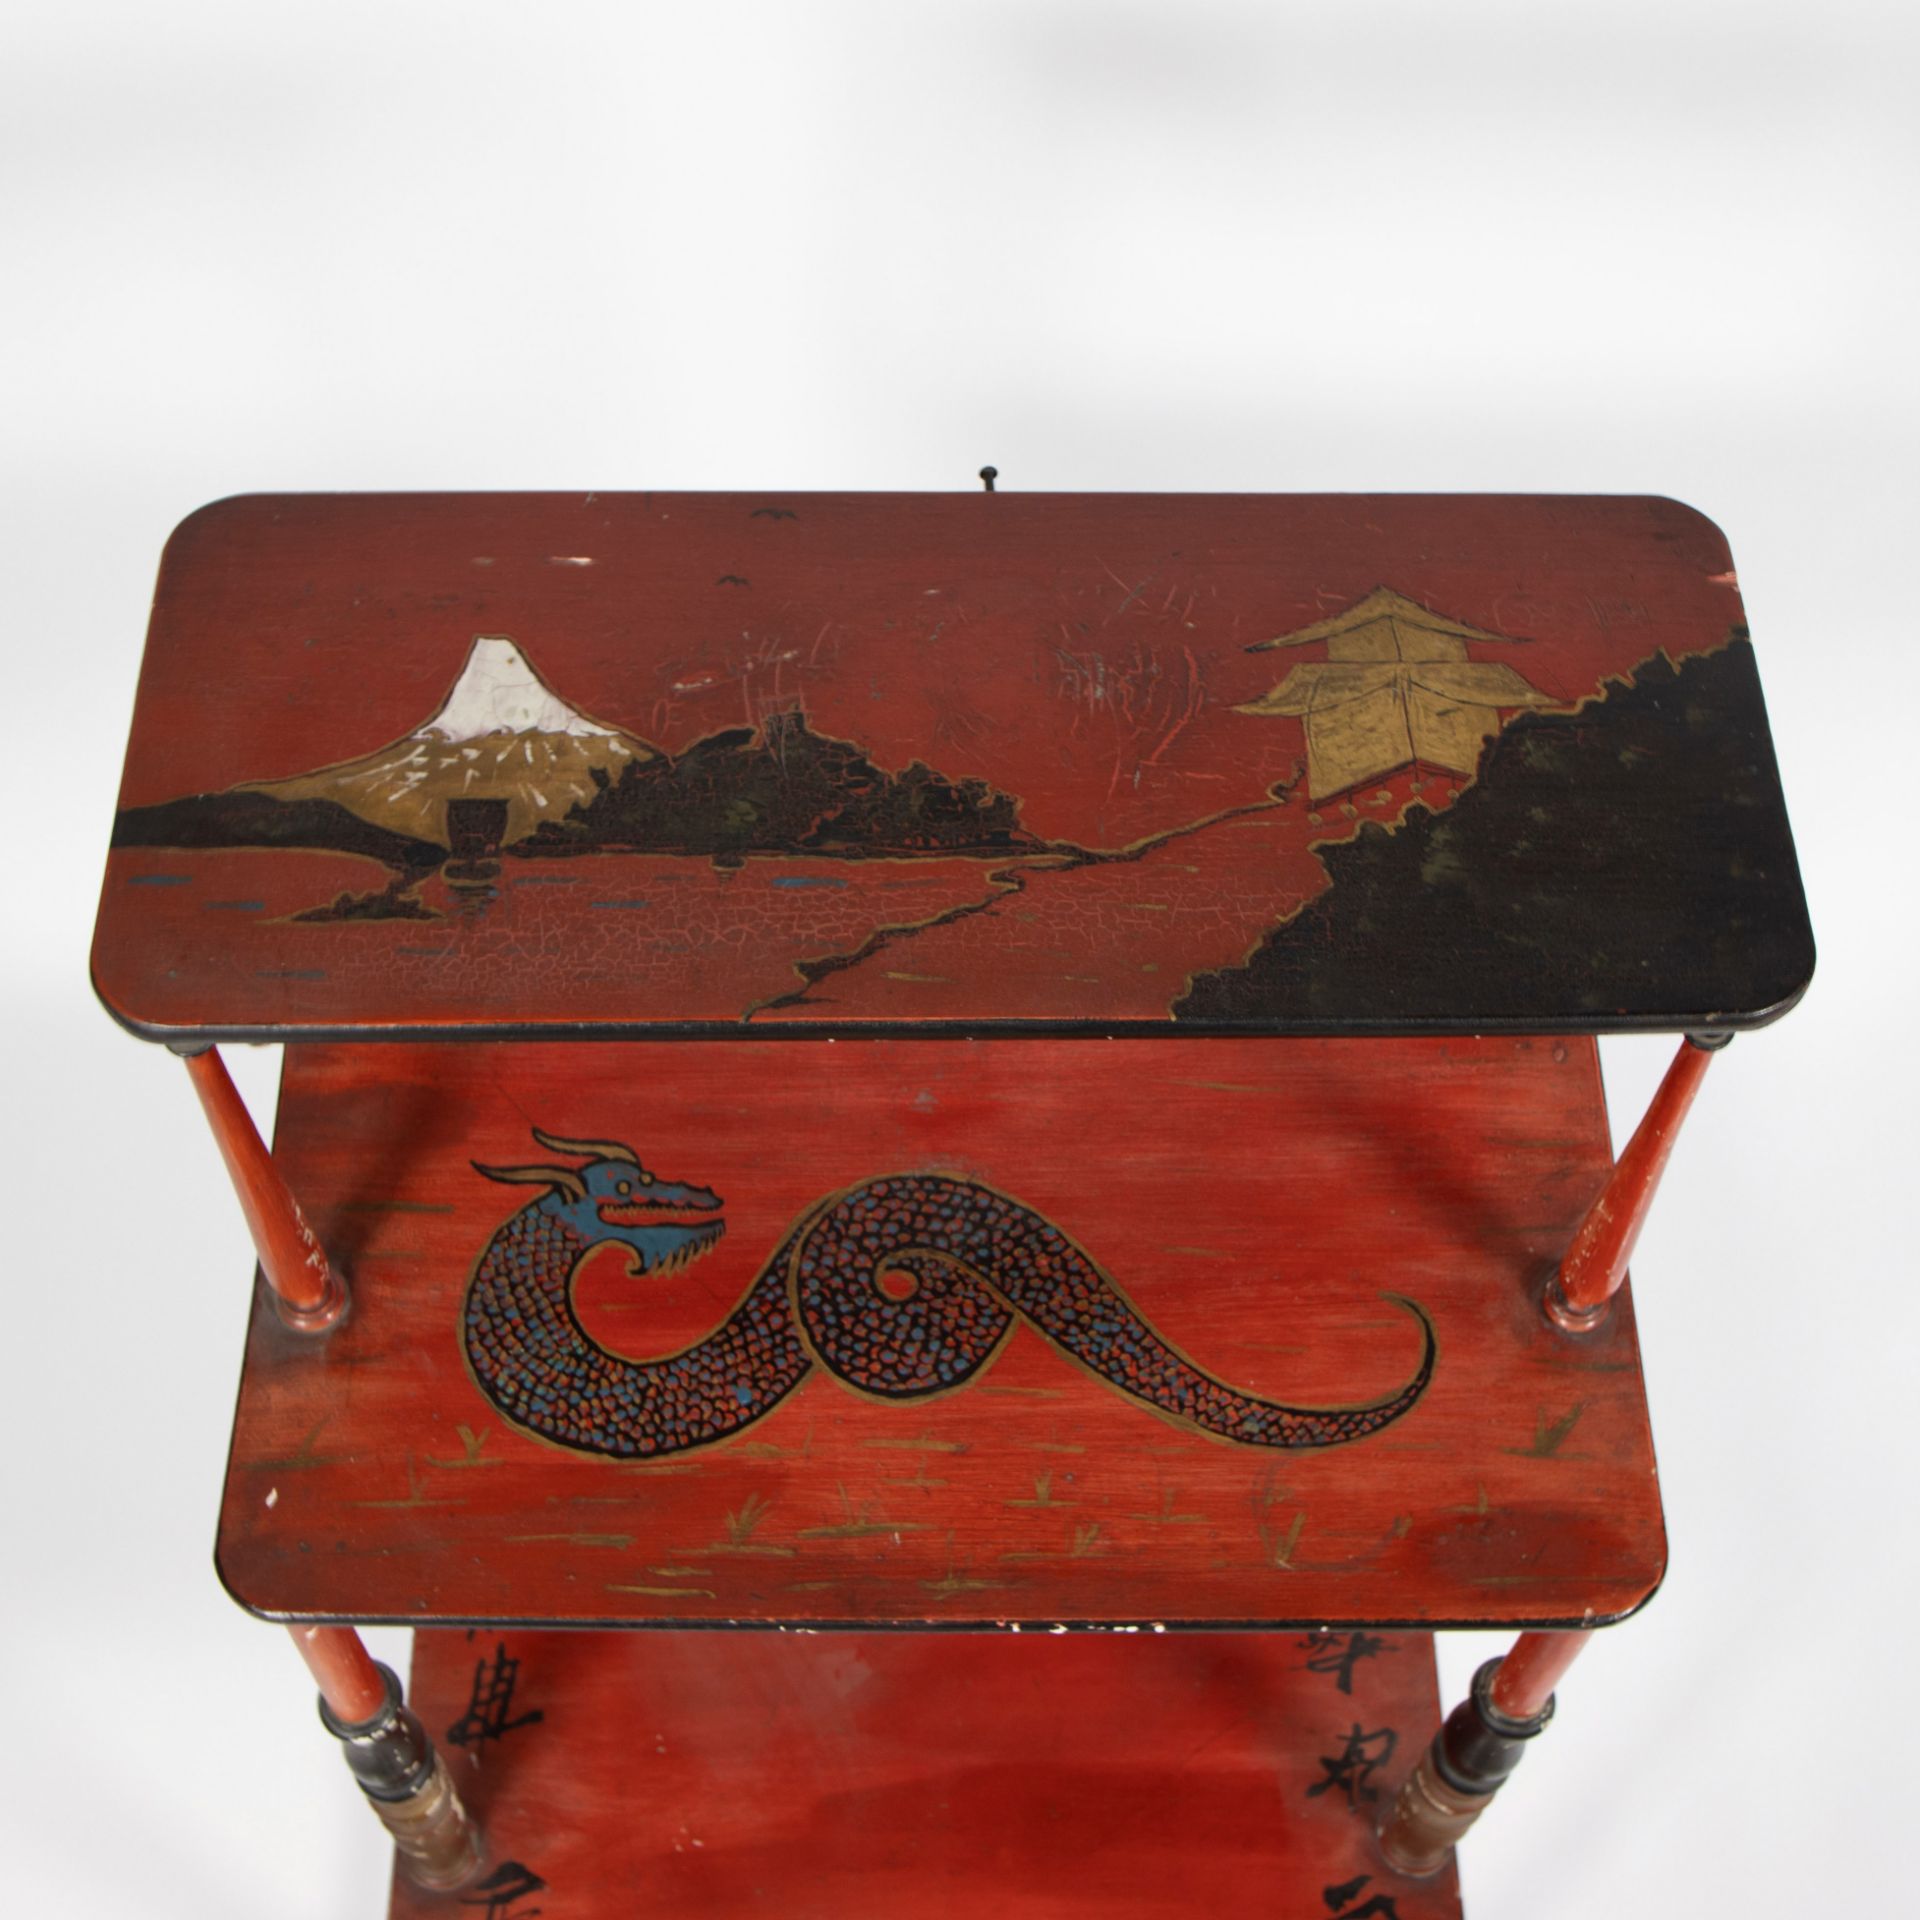 19th century Japanese étagère hand-painted with Mount Fuji and dragon decor. - Image 4 of 7